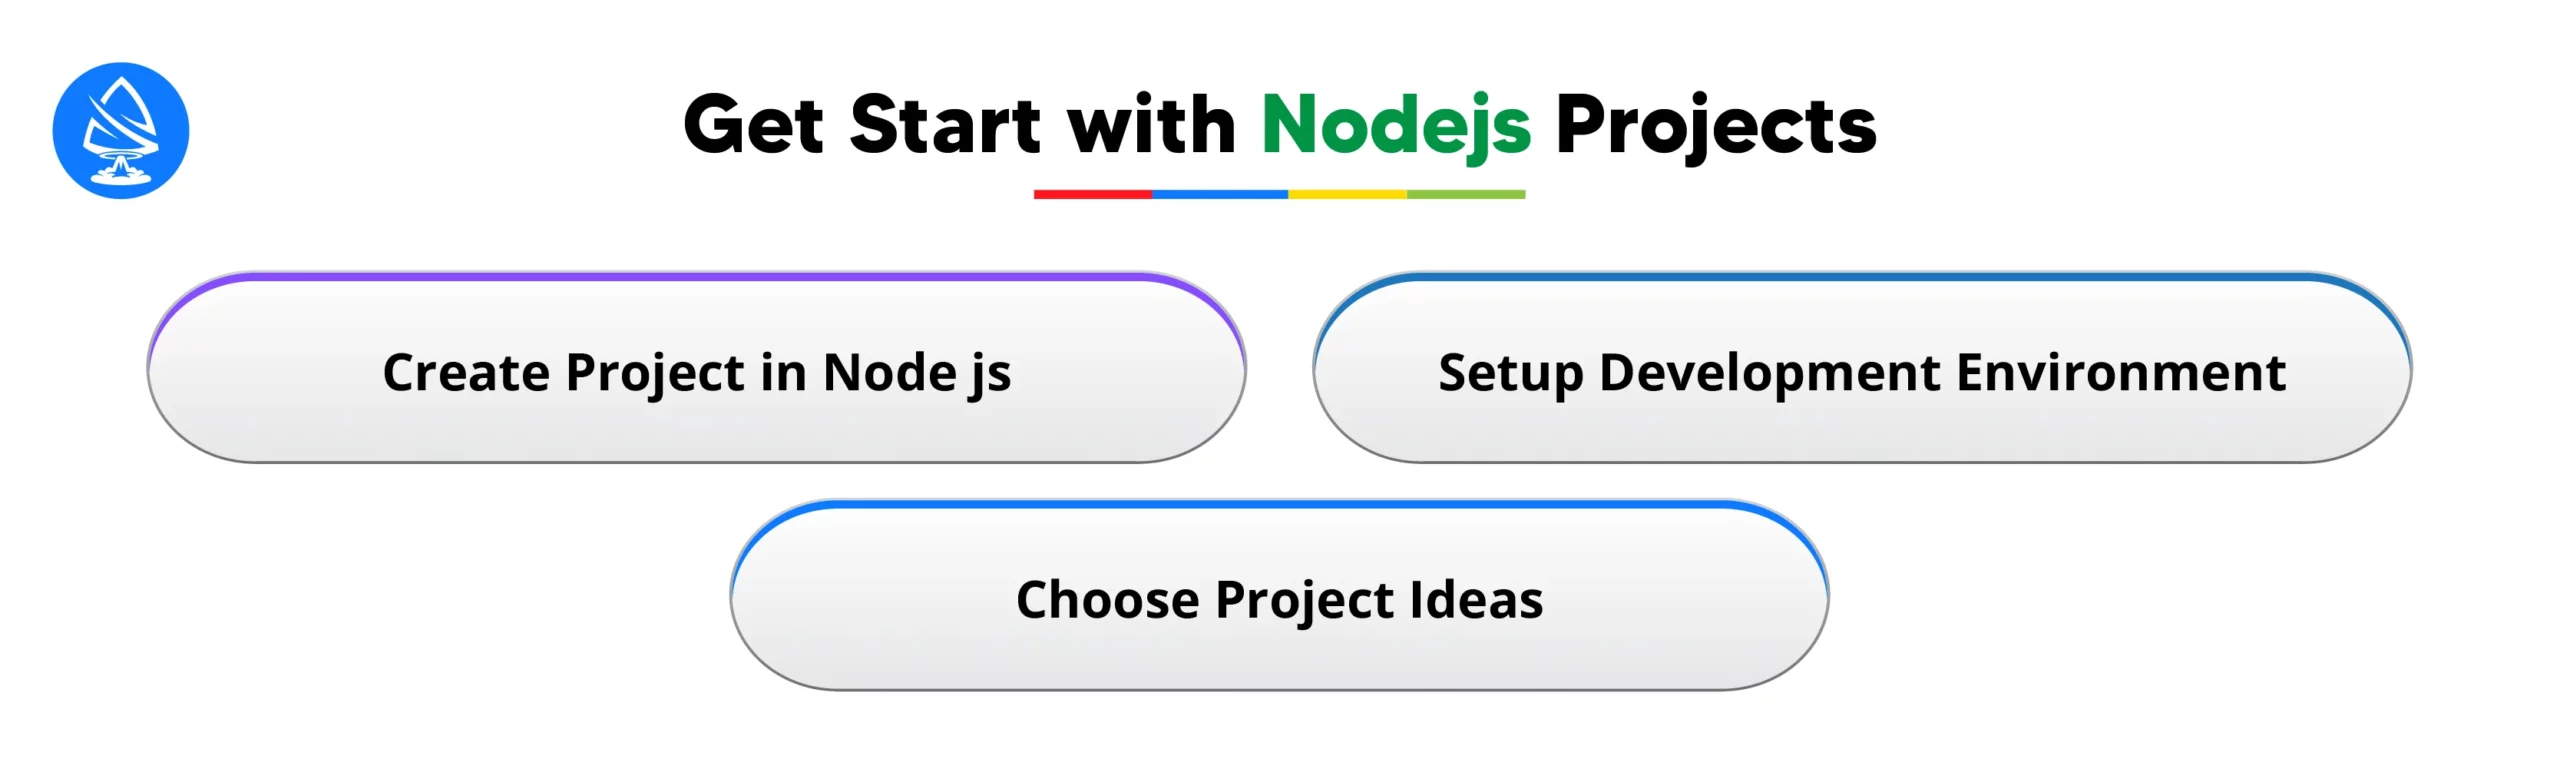 Get Start with Nodejs Projects 